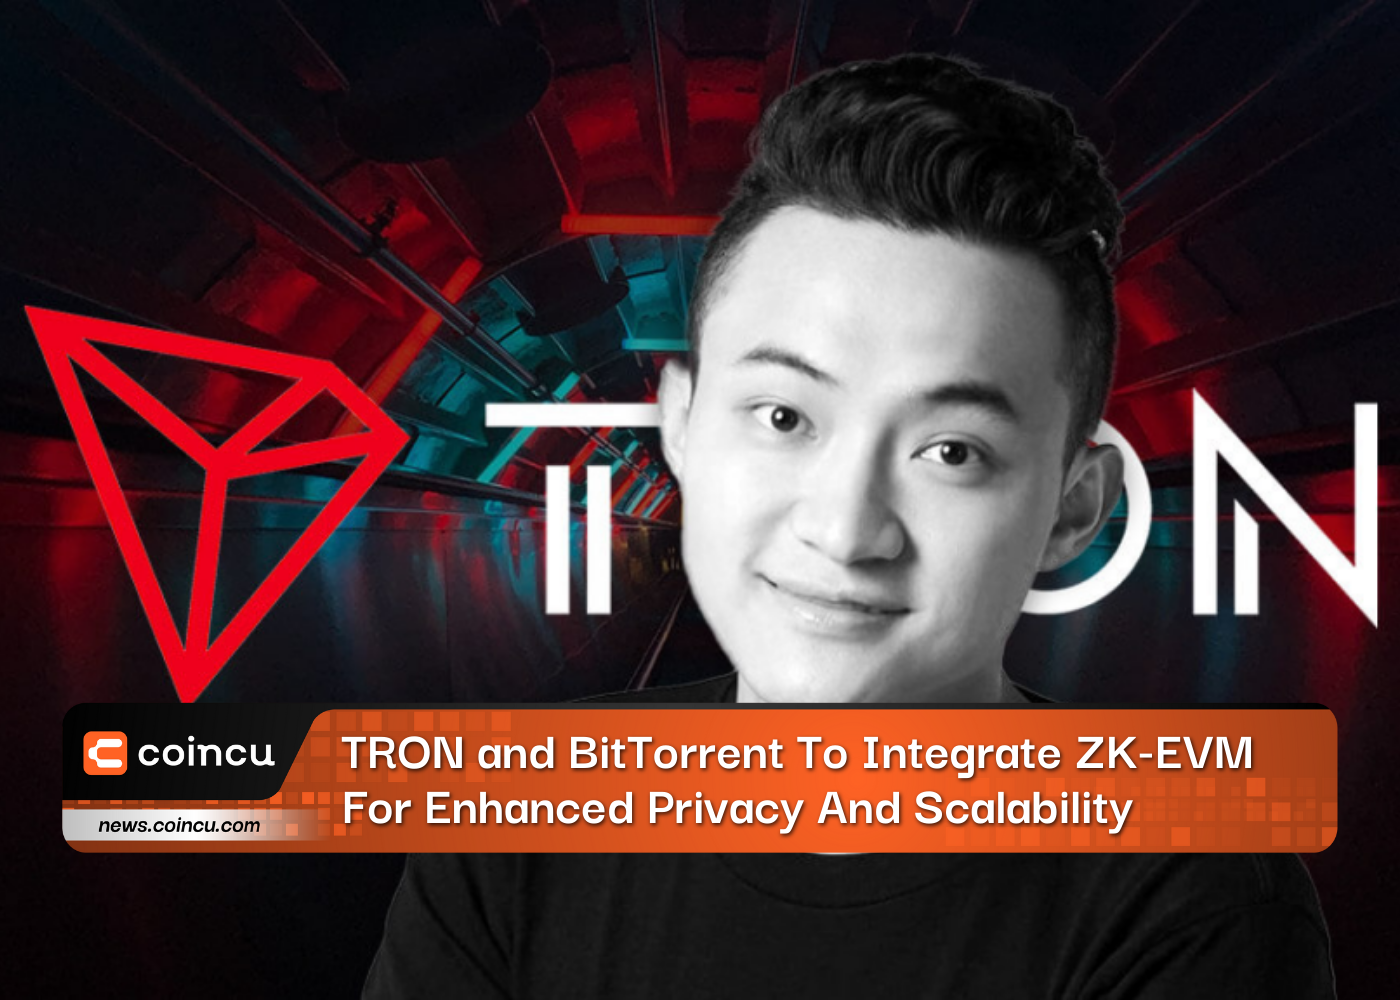 TRON and BitTorrent To Integrate ZK-EVM For Enhanced Privacy And Scalability